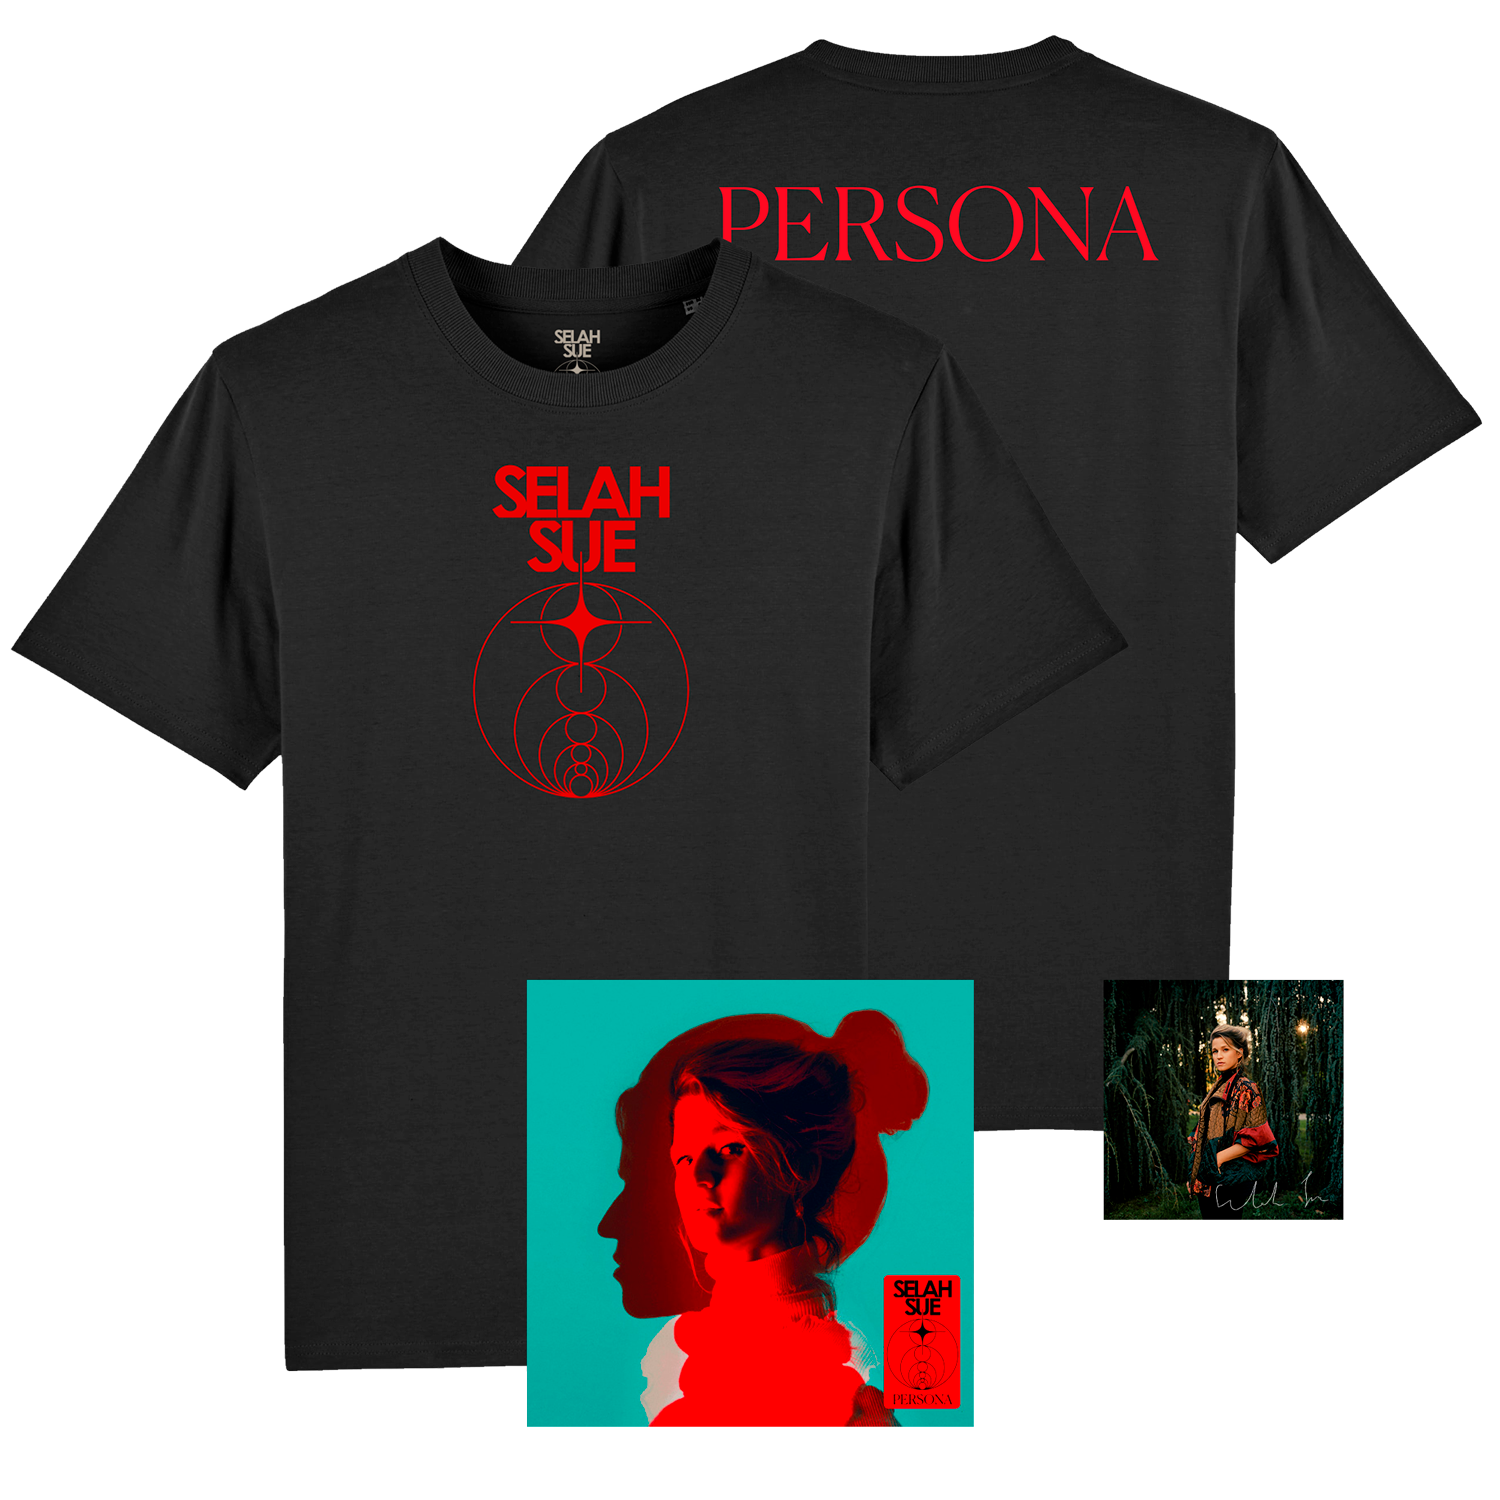 PERSONA T-SHIRT PACK